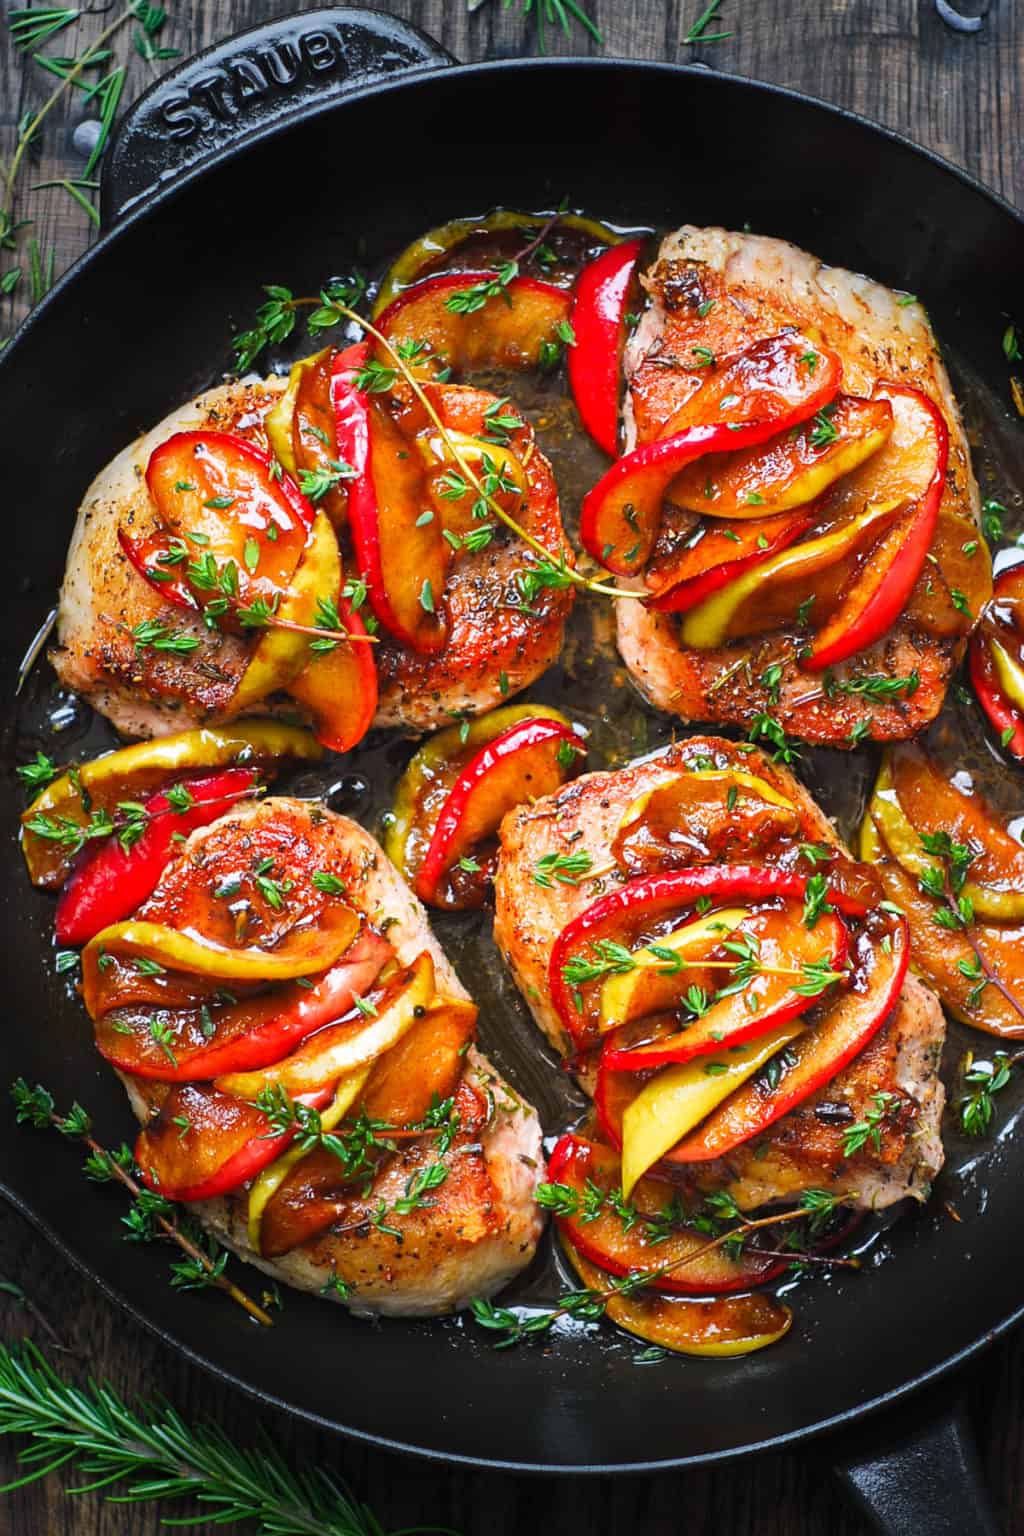 Pan-Seared Pork Chops with Caramelized Apples - Julia's Album